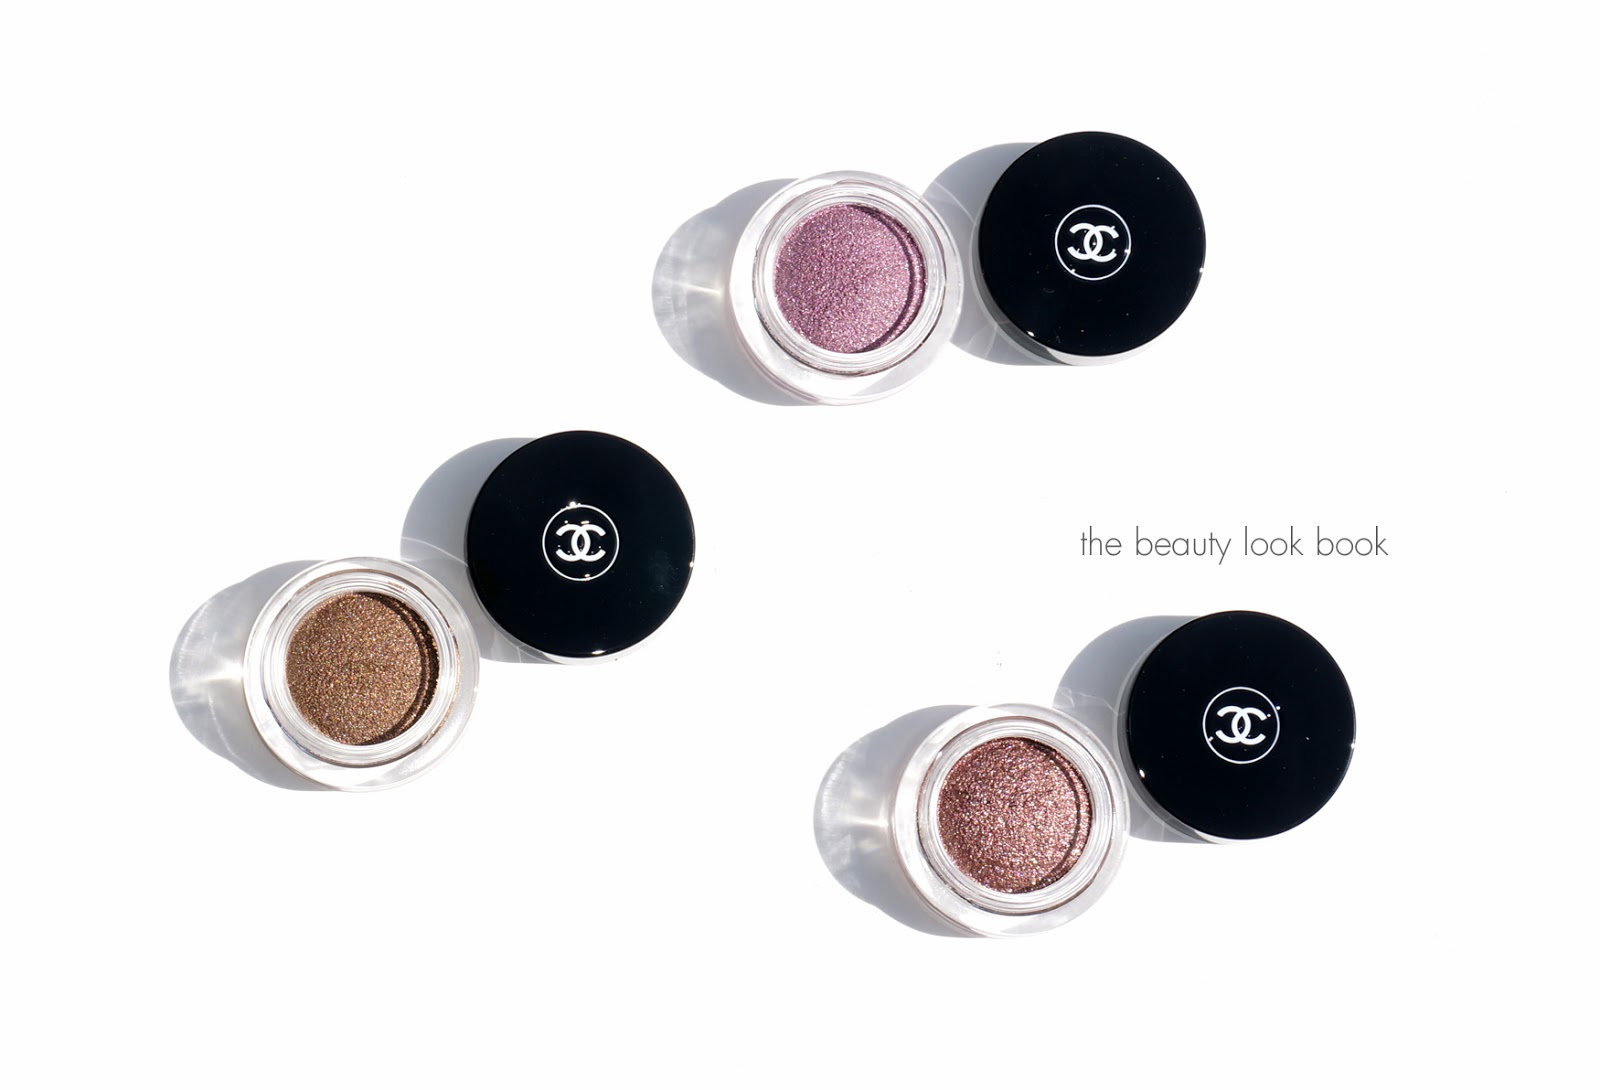 Makeup and Macaroons: Chanel Illusion D'Ombre in Illusoire